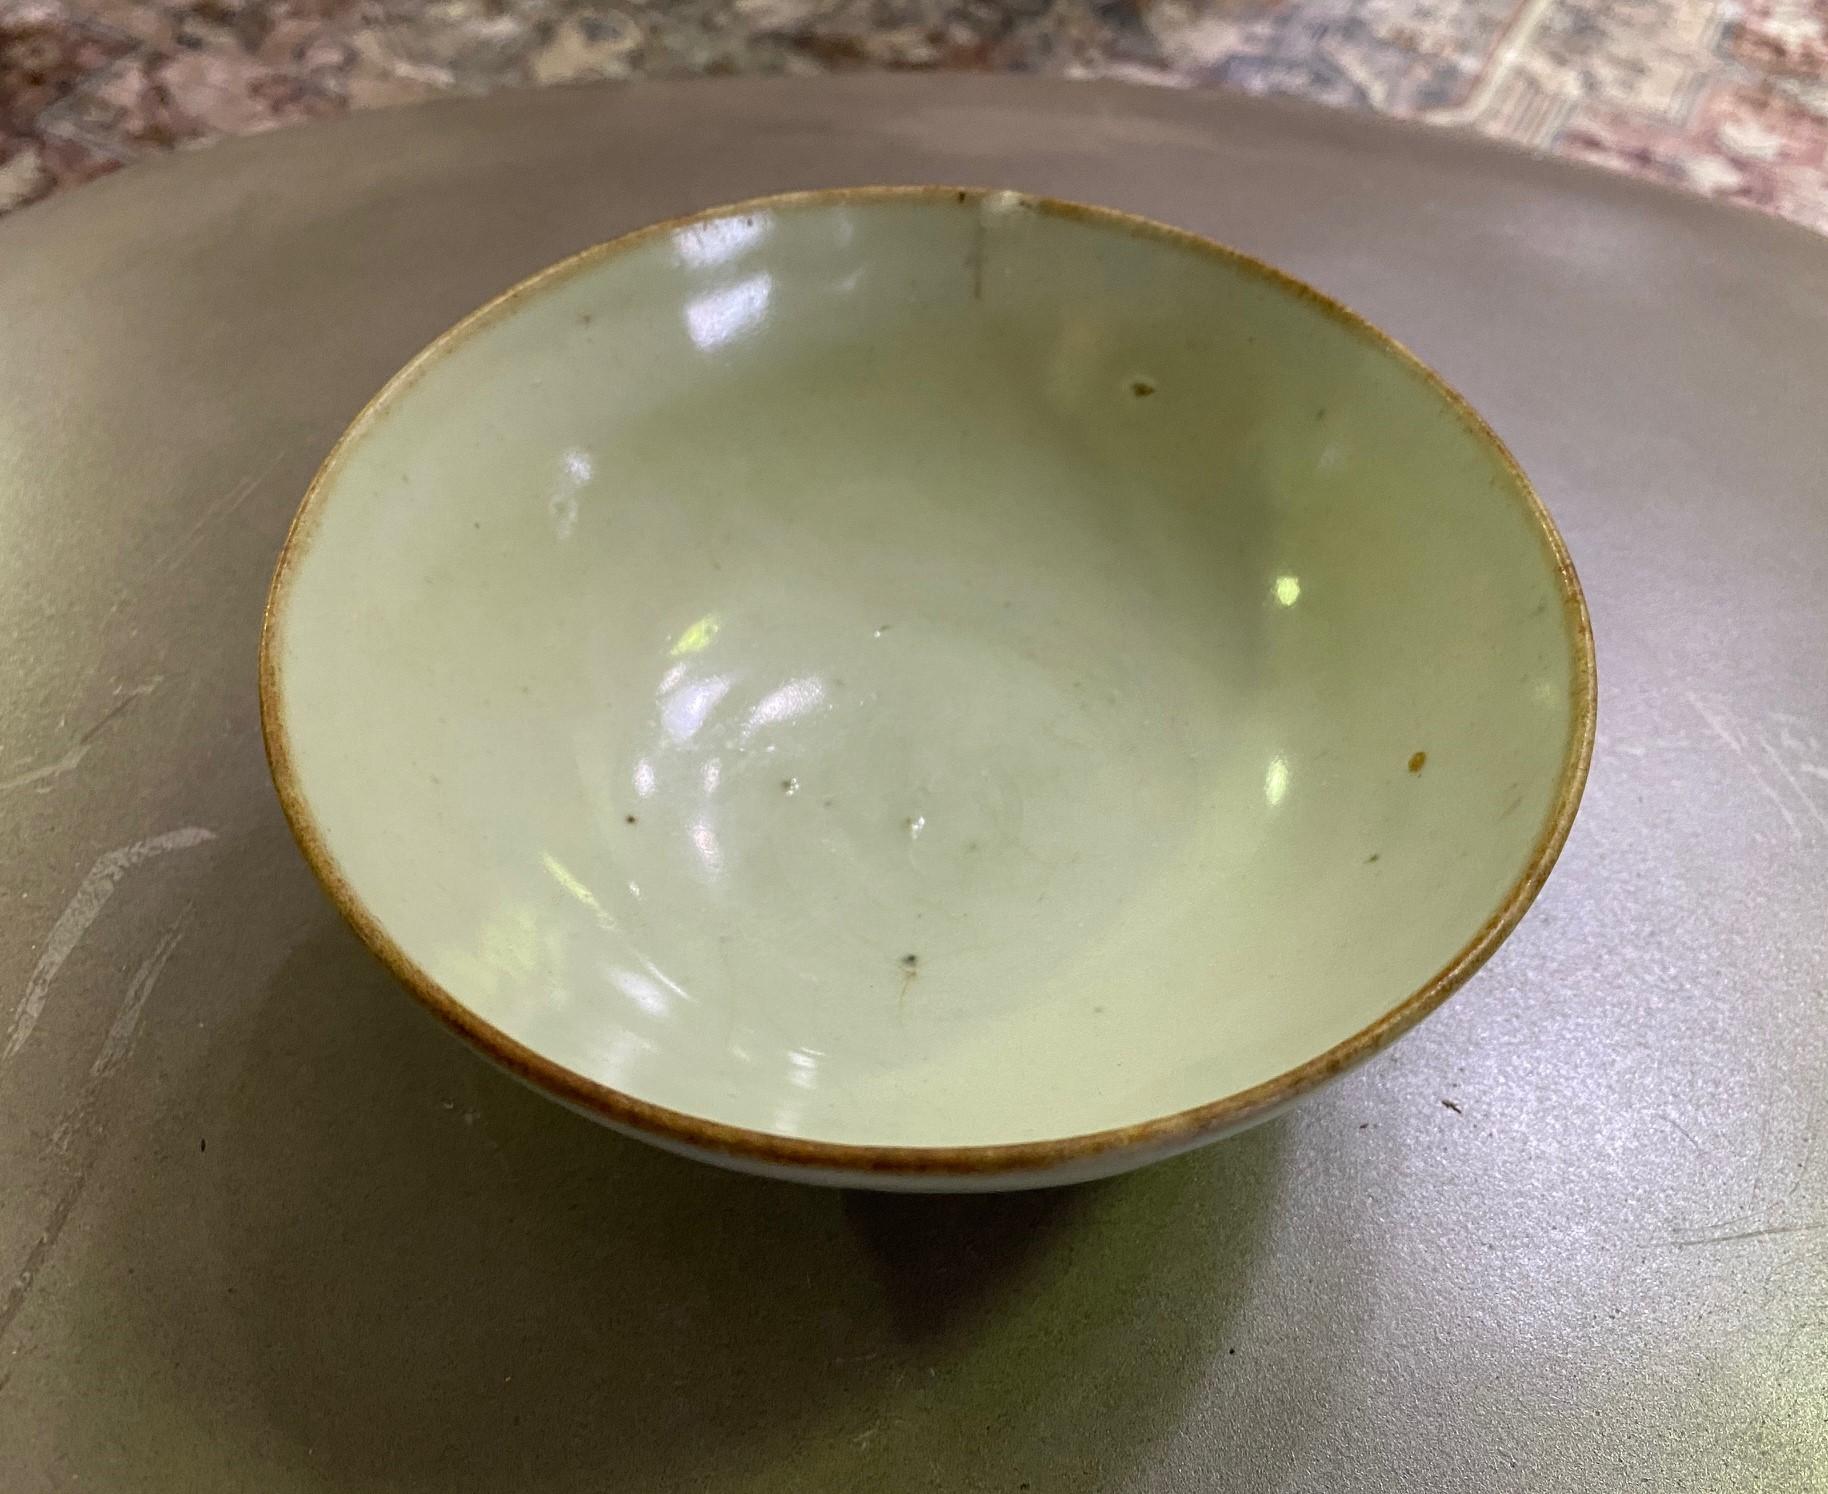 A wonderful Joseon Dynasty (1392-1897) Korean pottery bowl with a beautiful muted glaze, color, and nicely aged patina. 

As this is not our area of expertise, we are listing it simply as 19th century but it could very well be much older.